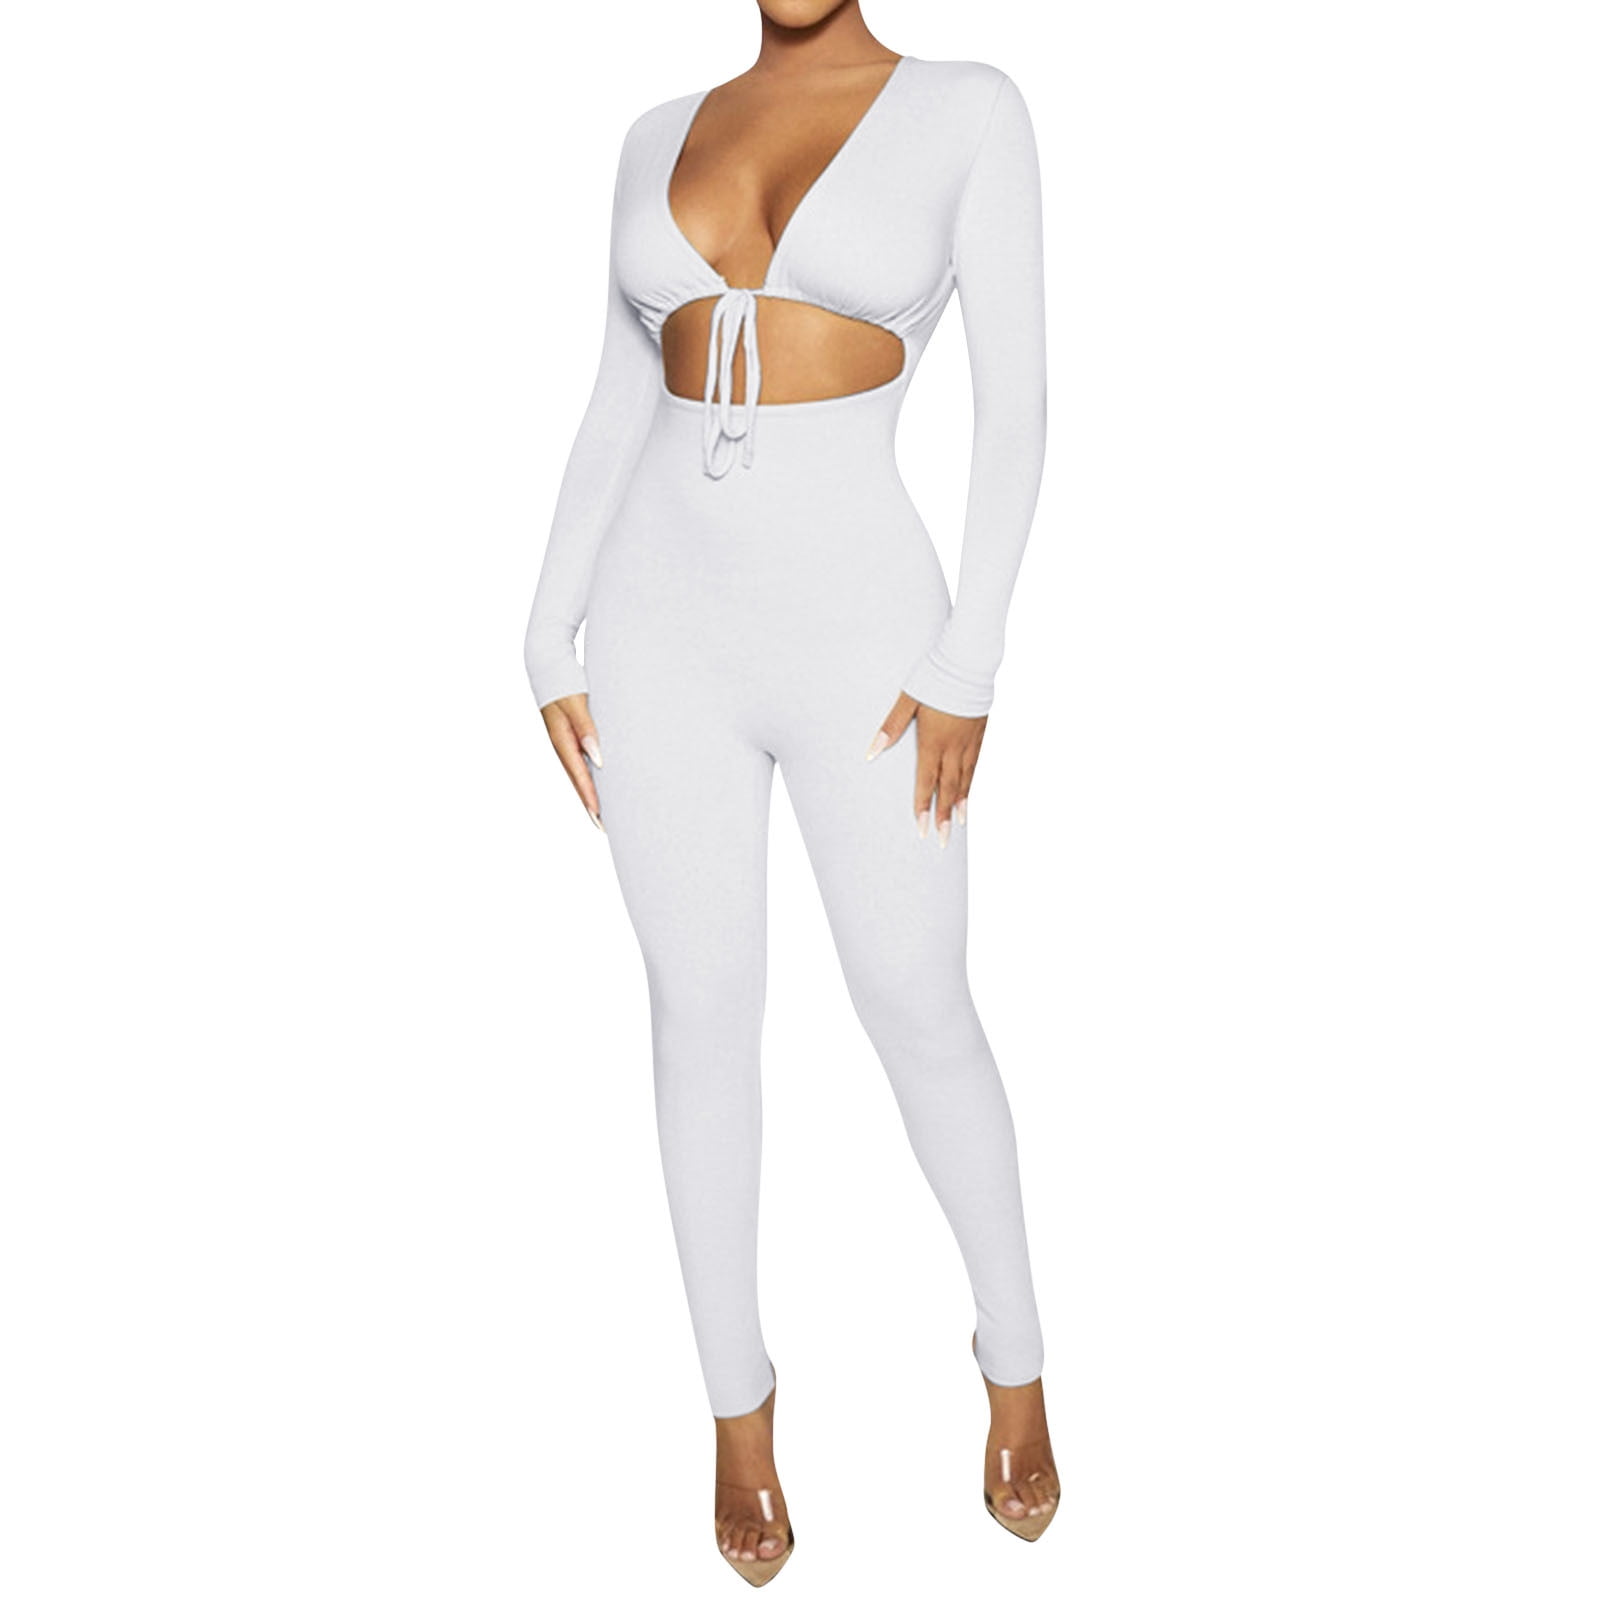 TAIAOJING Jumpsuits For Women Long Sleeve Jumpsuit Bodysuit Bodycon Shorts  Stretchy Romper